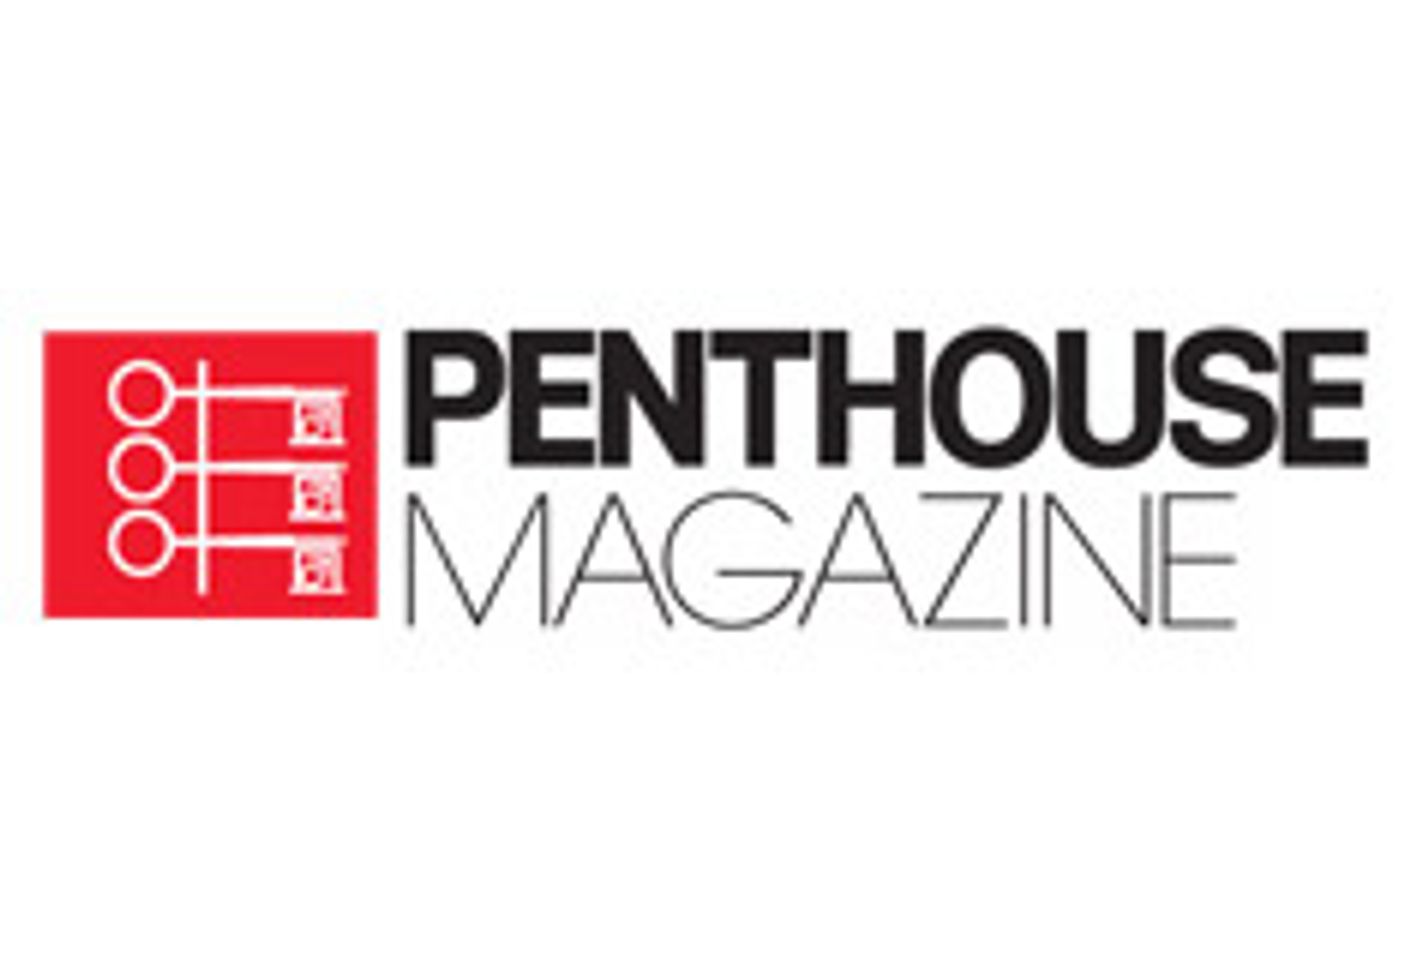 <i>Penthouse</i> Movie Issue on Newsstands